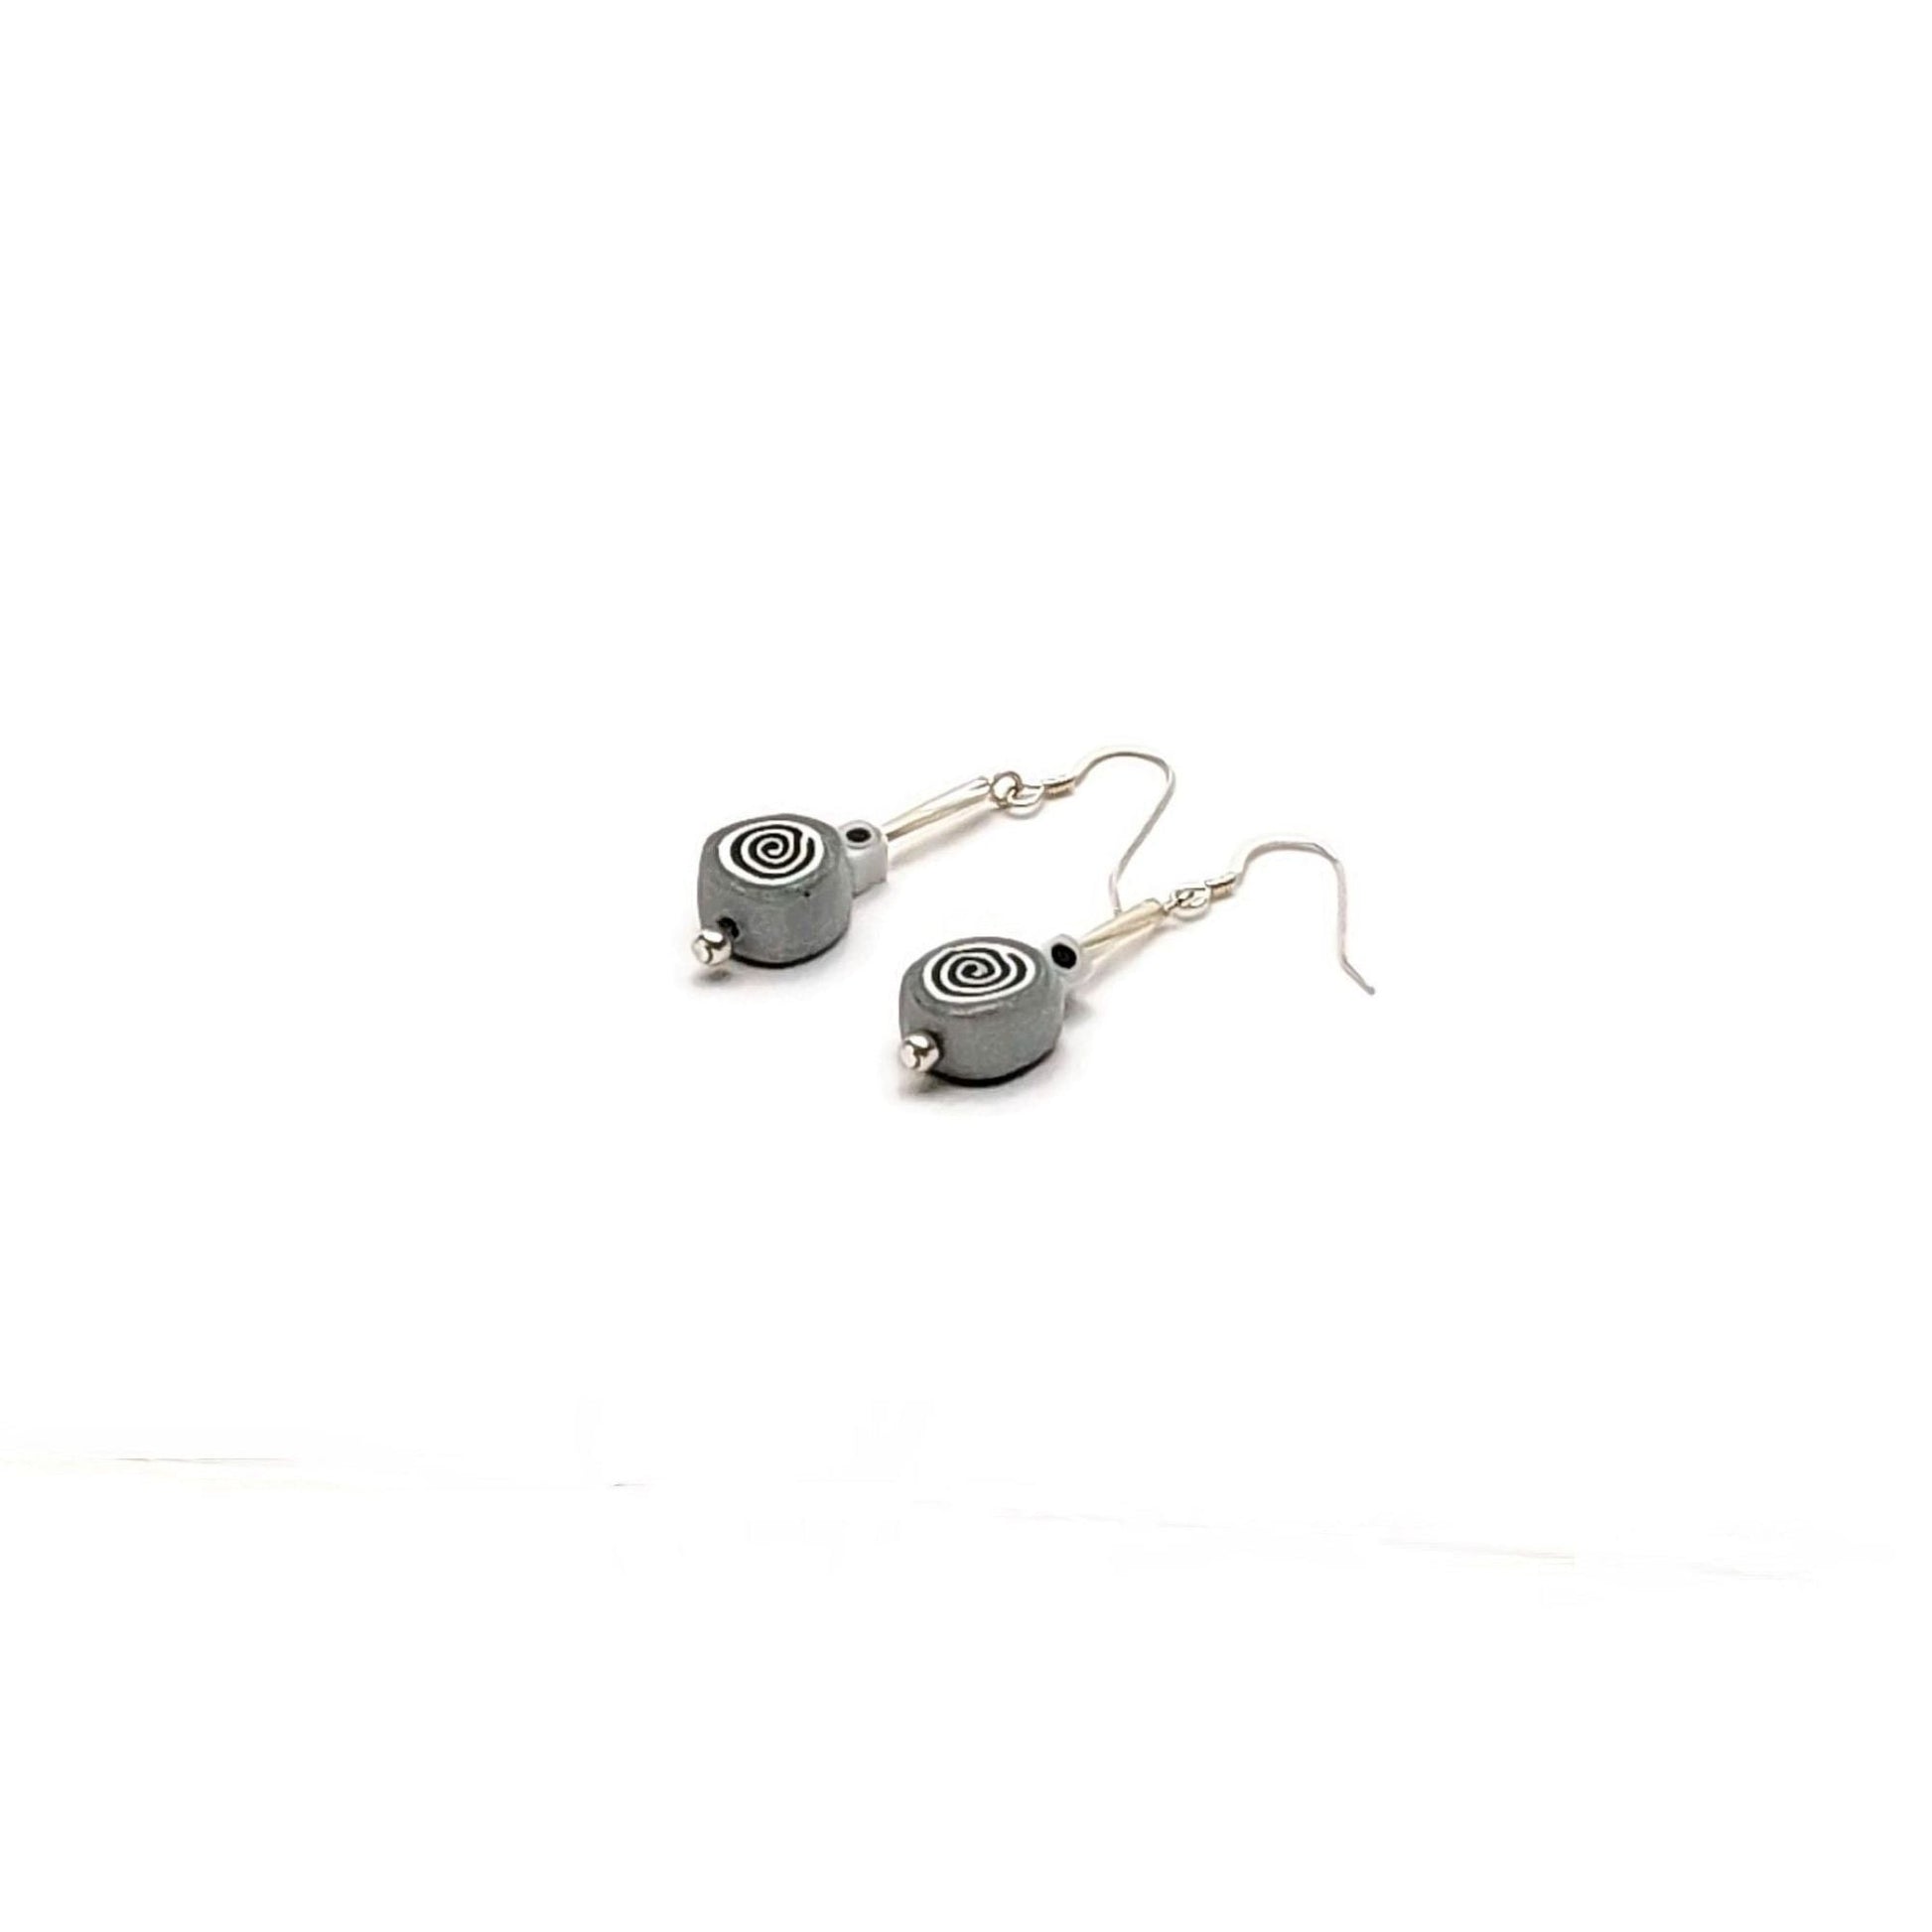 Polymer clay spiral bead drop earrings with sterling silver ear wires on white background